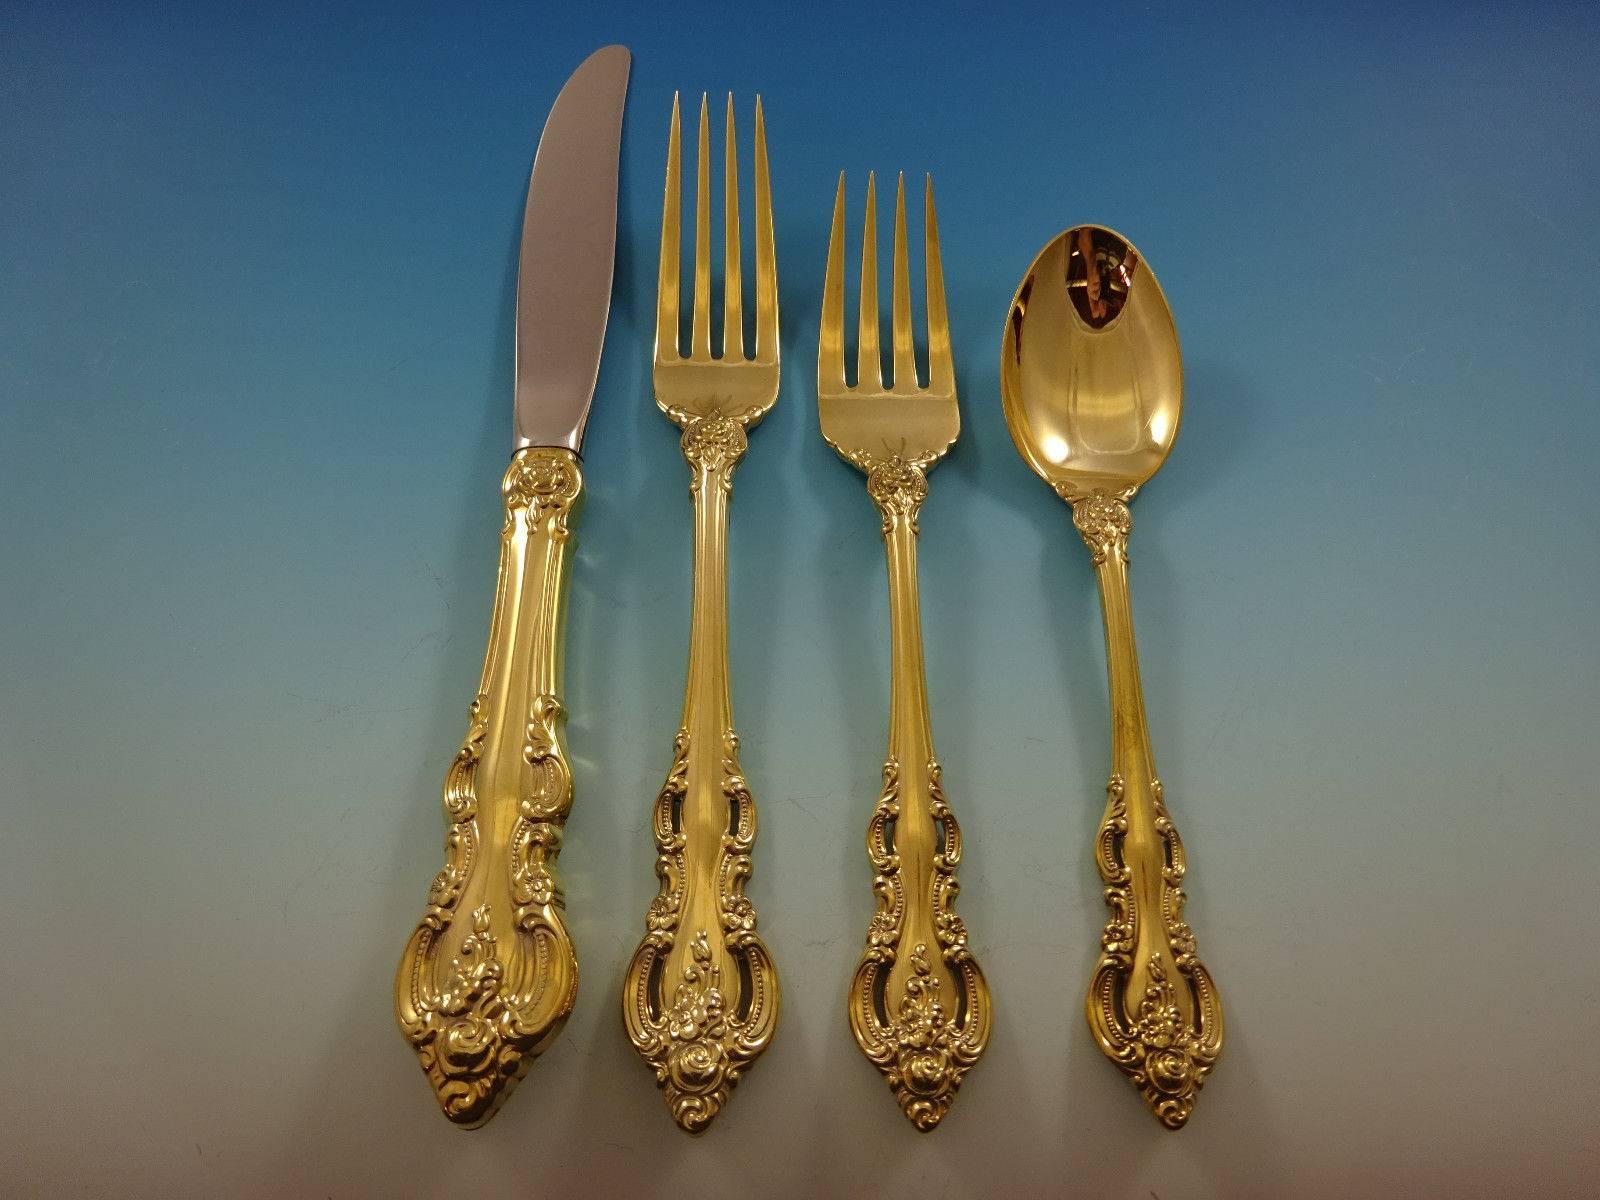 El Grandee Gold by Towle Sterling Silver flatware set - 48 pieces. 

Gold flatware is on trend and makes a bold statement on your table, especially when paired with gold rimmed china and gold accents. This set is vermeil (completely gold-washed) and